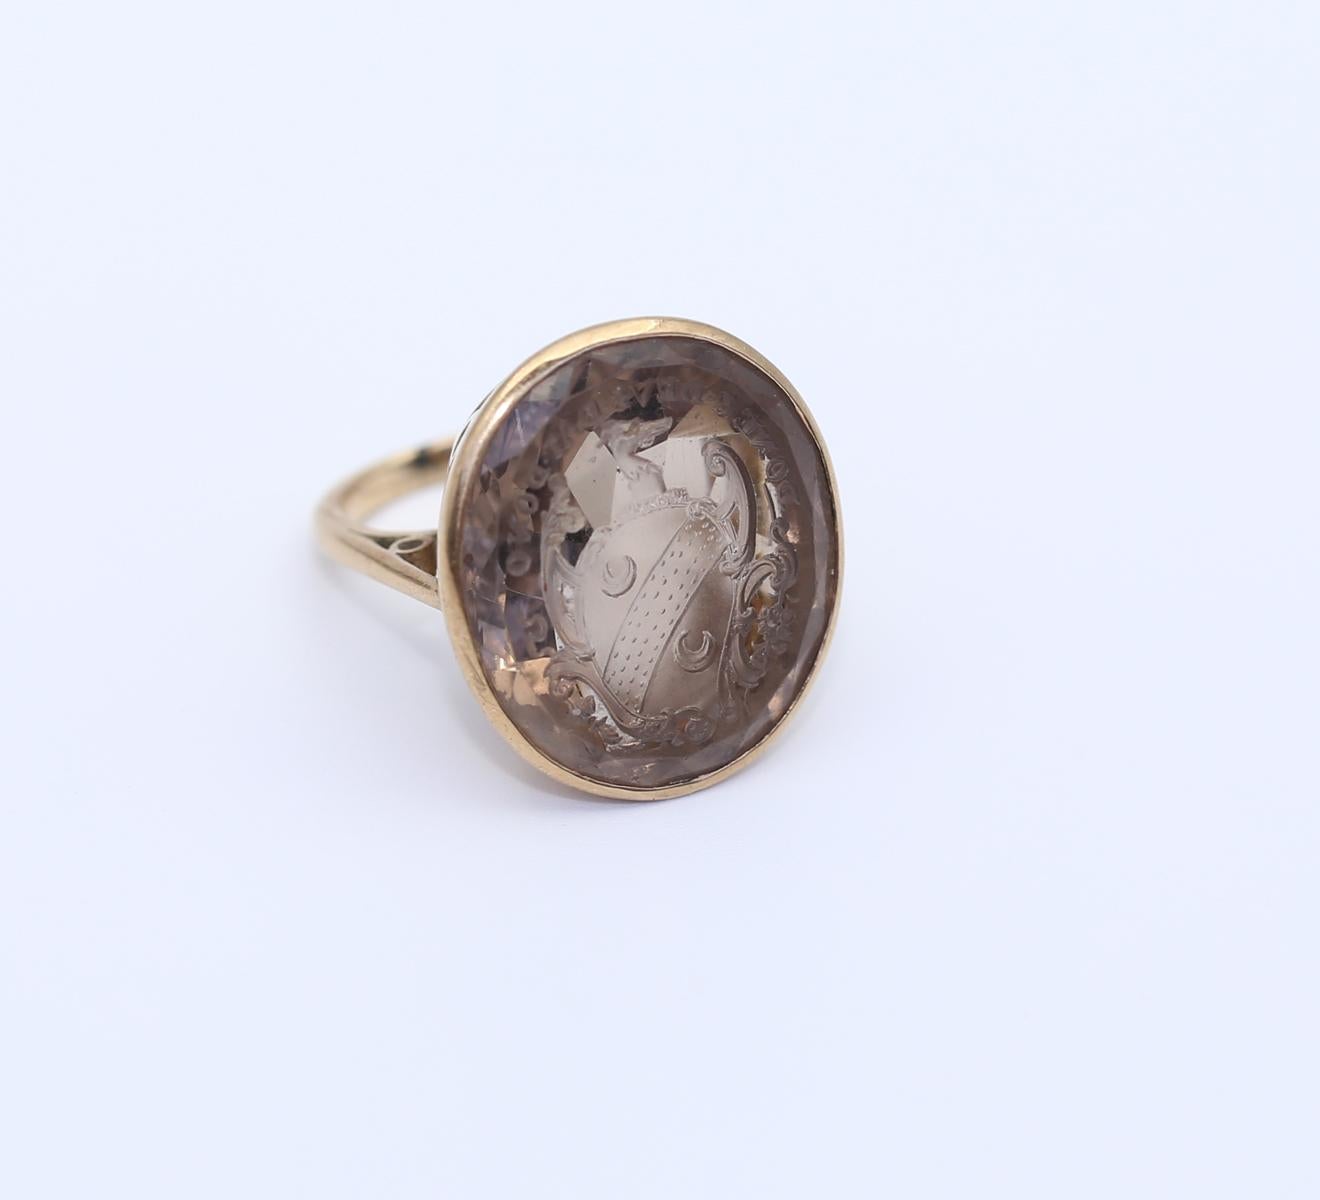 Signet Topaz British Ring 9Ct Gold. Created around 1890.
Huge and fine Antique English topaz signet ring. The top of the Signet has the moto:

“Donec Devs Dat Dono”

The motto could be translated from Latin as 